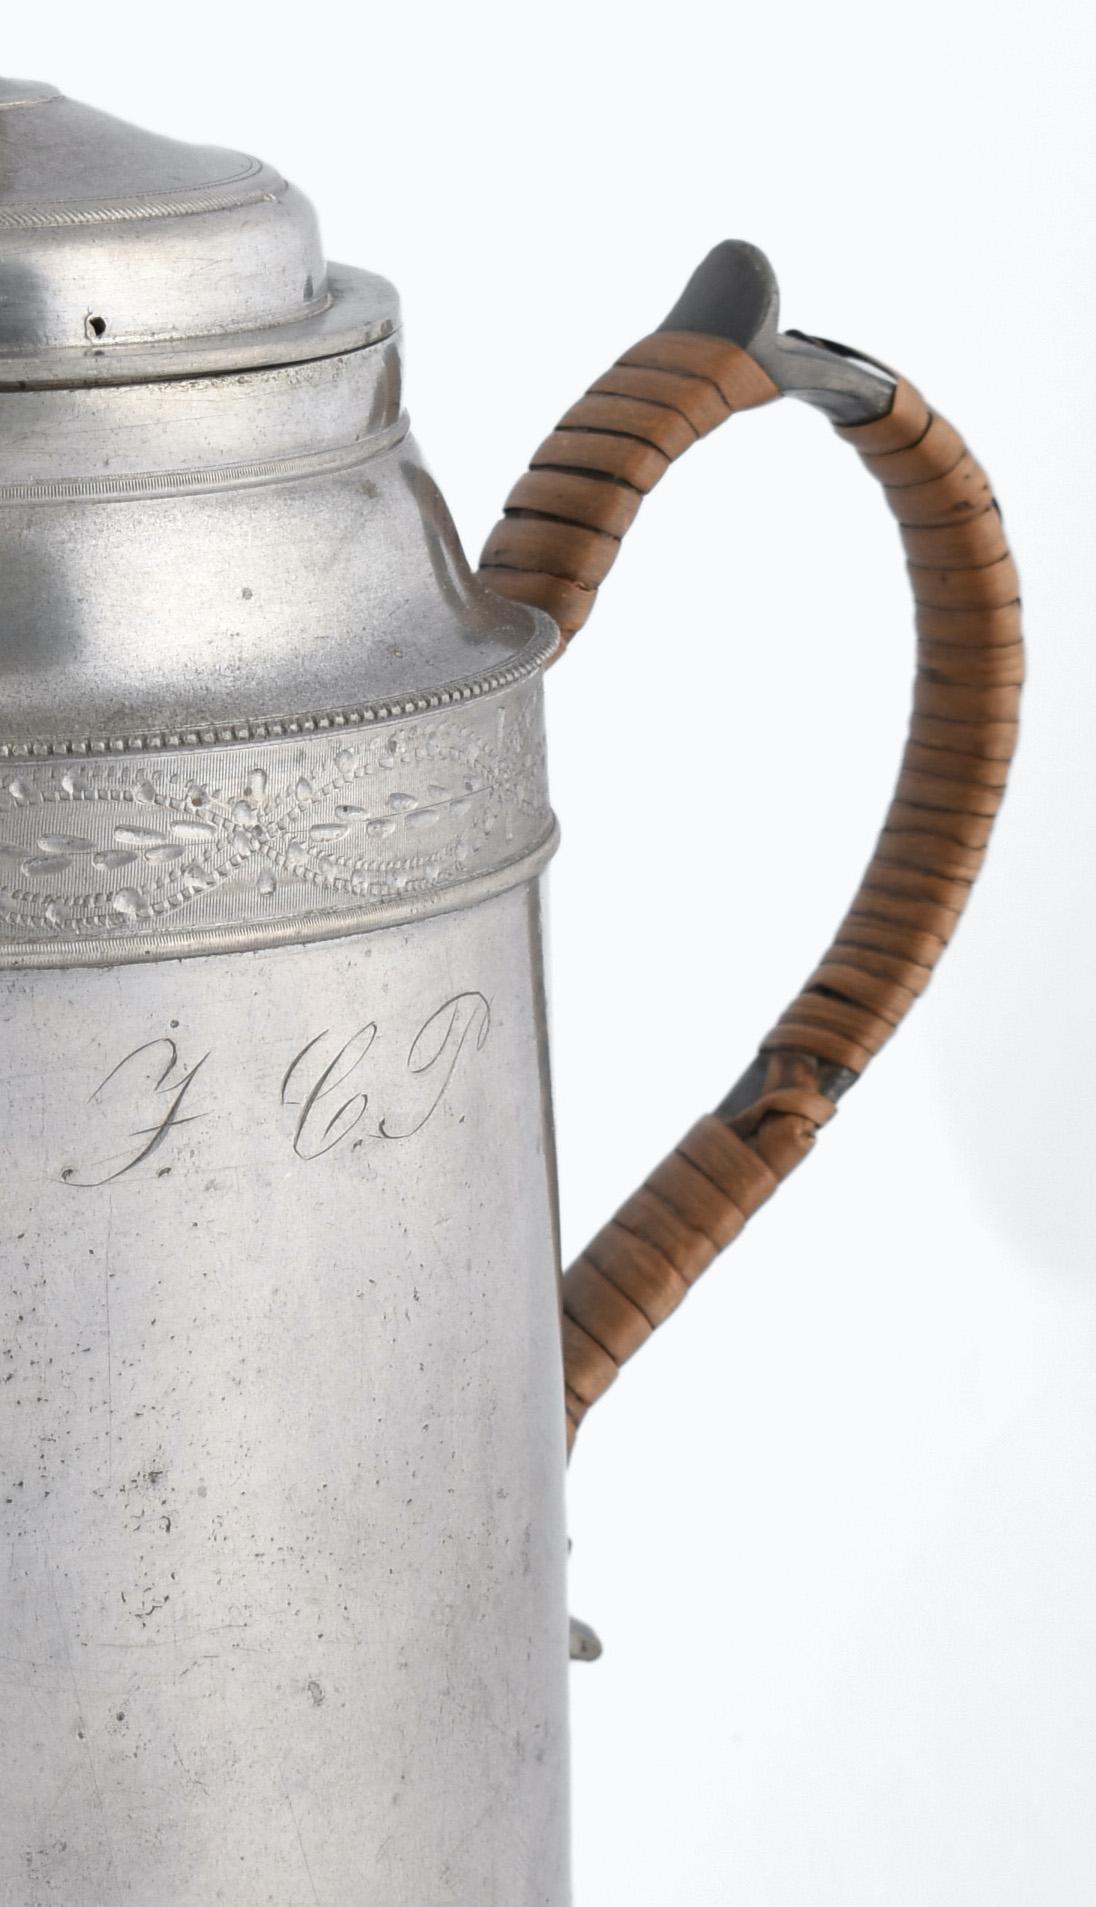 Vintage Jugensdstil coffee pot is an original decorative object realized in Germany in the end of the 19th century.

Original tin. Canné handle.

Realized by Jacob Heinrich Weiss. 

Made in Germany.

Good conditions: some signs of age are